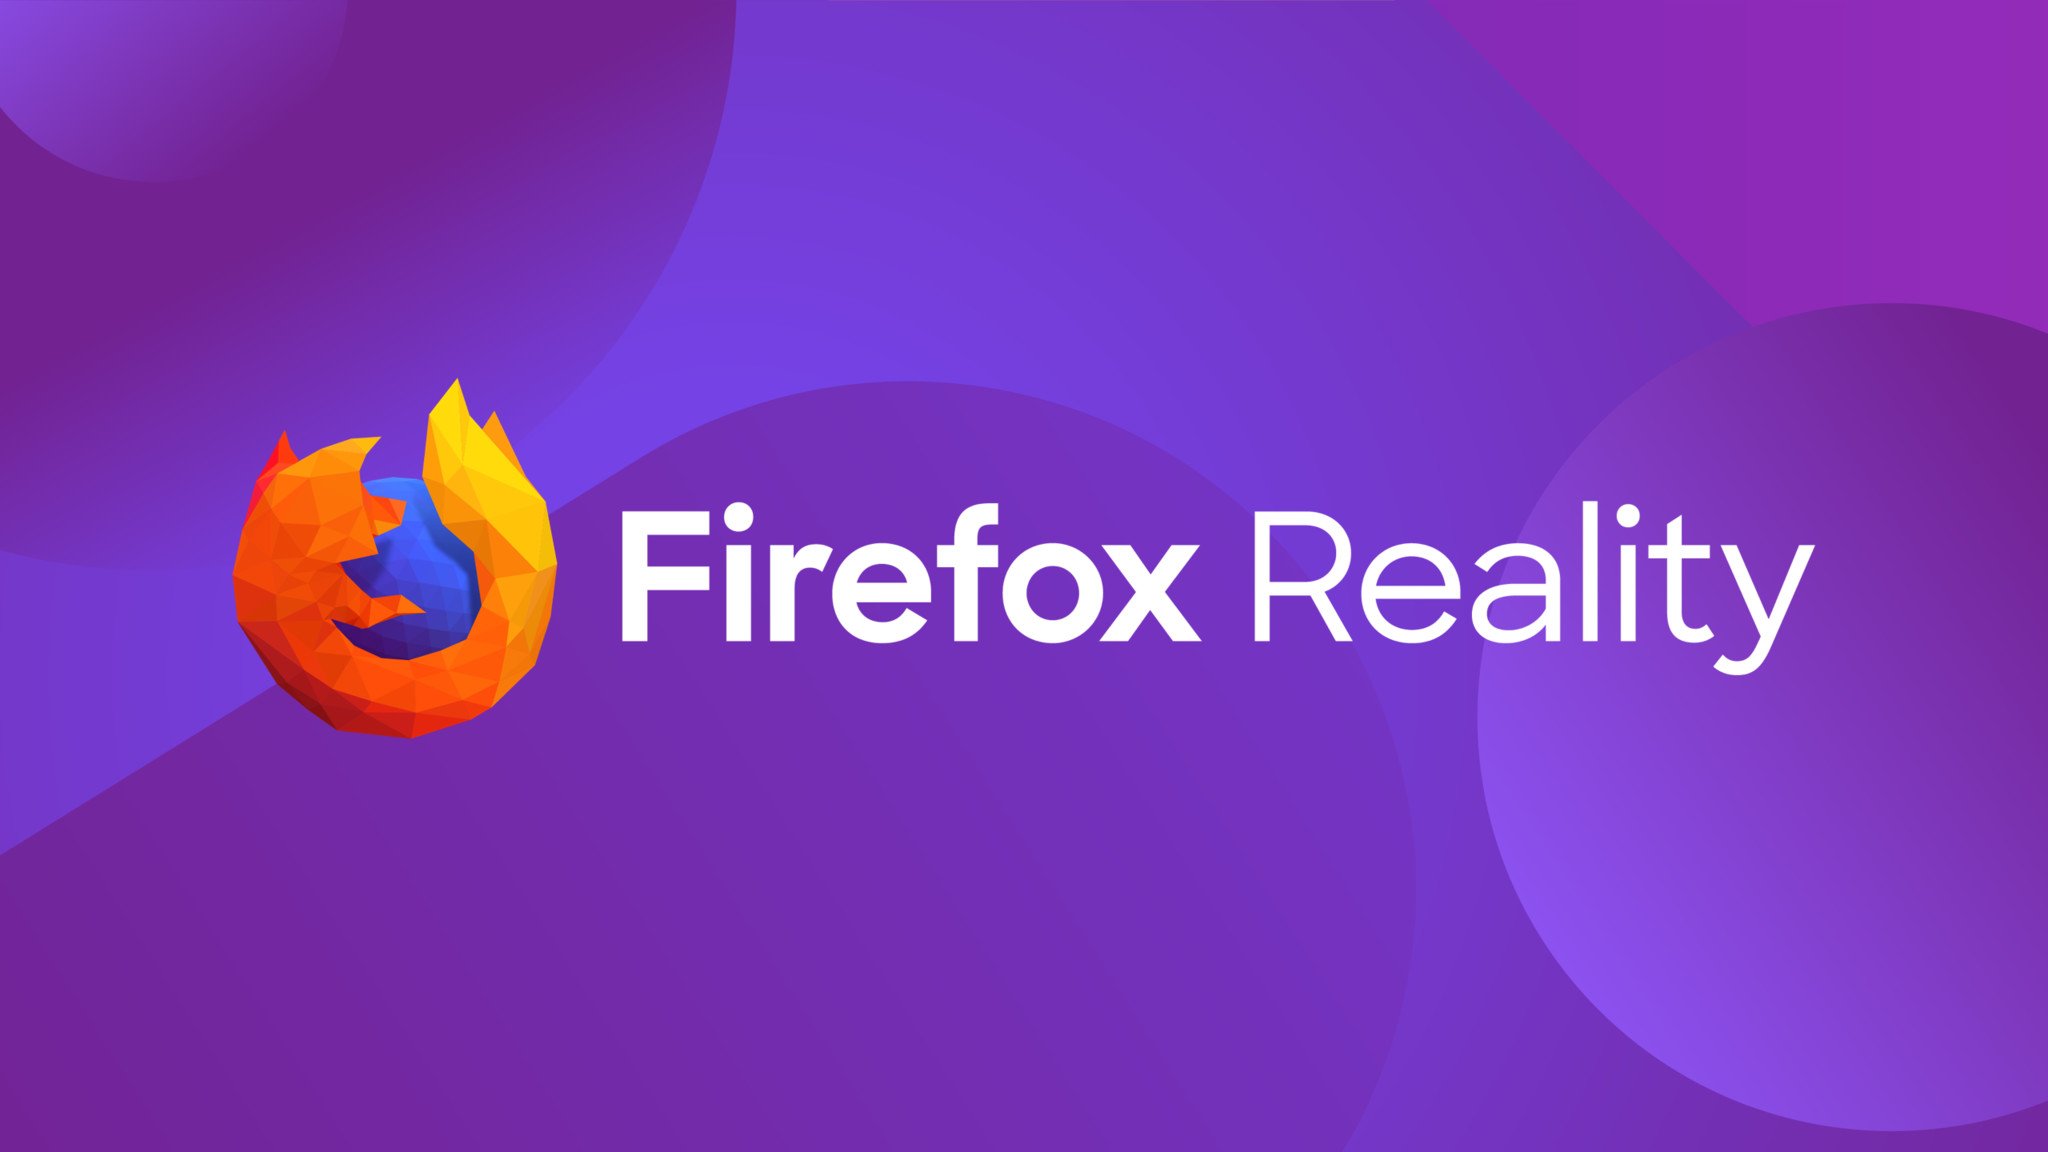 Firefox Reality launches on HoloLens 2 and in the Microsoft Store thumbnail